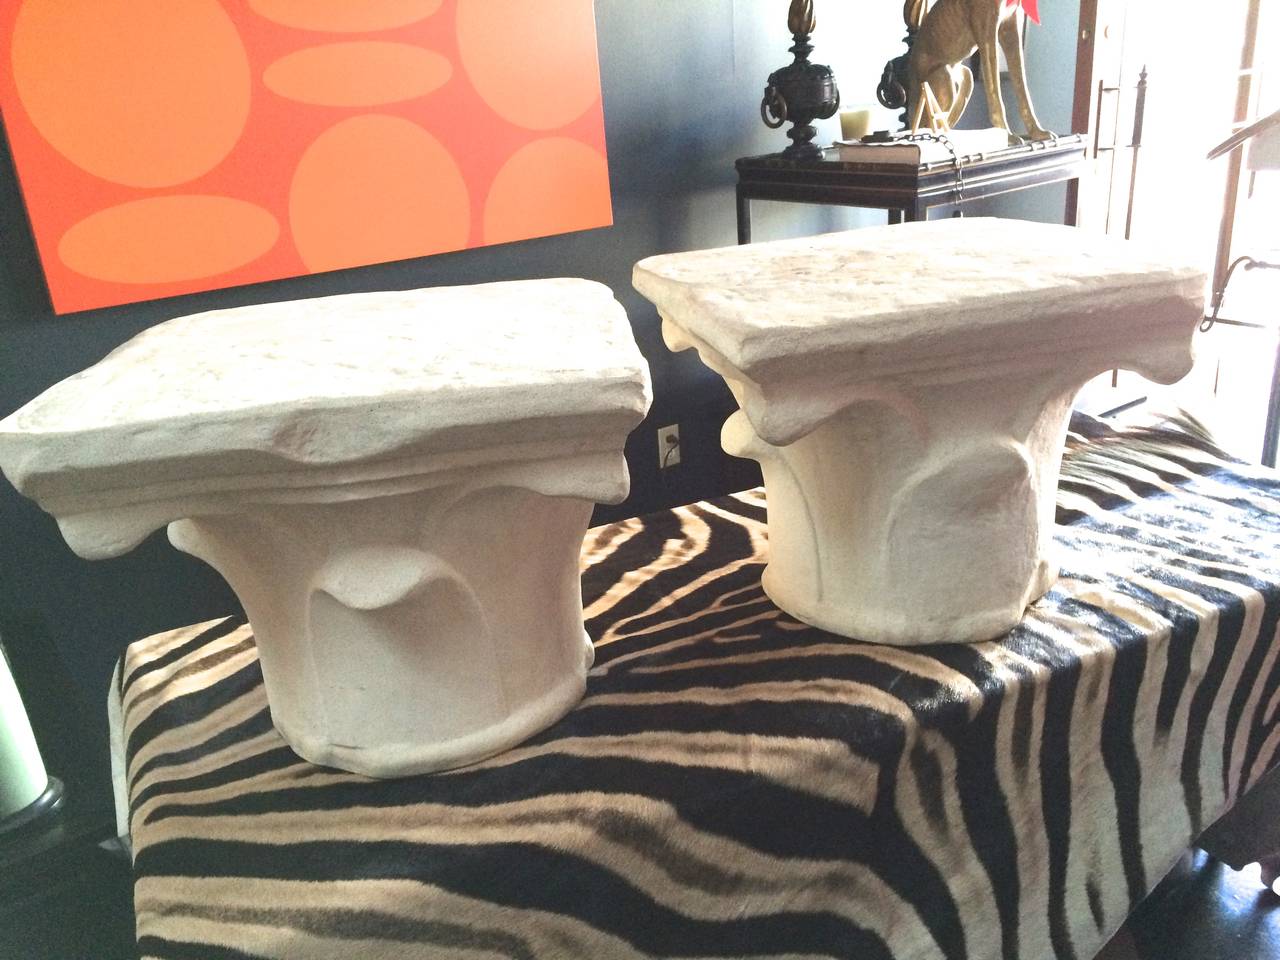 This pair is from a prominent music producers Malibu Estate.

The molded stone like tables are perfect for outdoor or indoor use. The capital inspired style is perfect for any interior or exterior room. The top is large and flat enough to use as